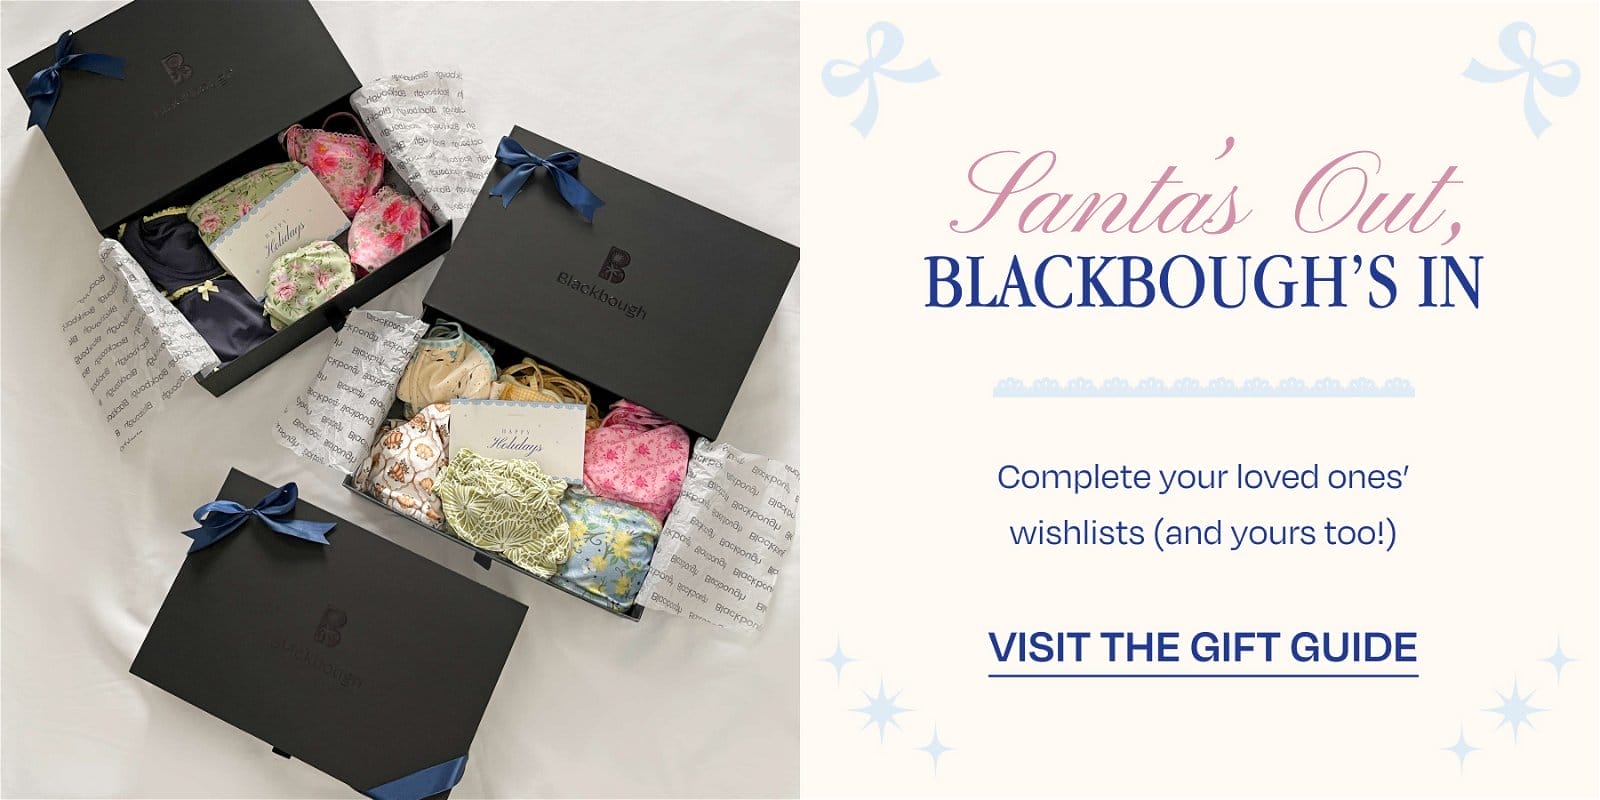 SANTA'S OUT, BLACKBOUGH'S IN.Complete your loved ones’ wishlists (and yours too)